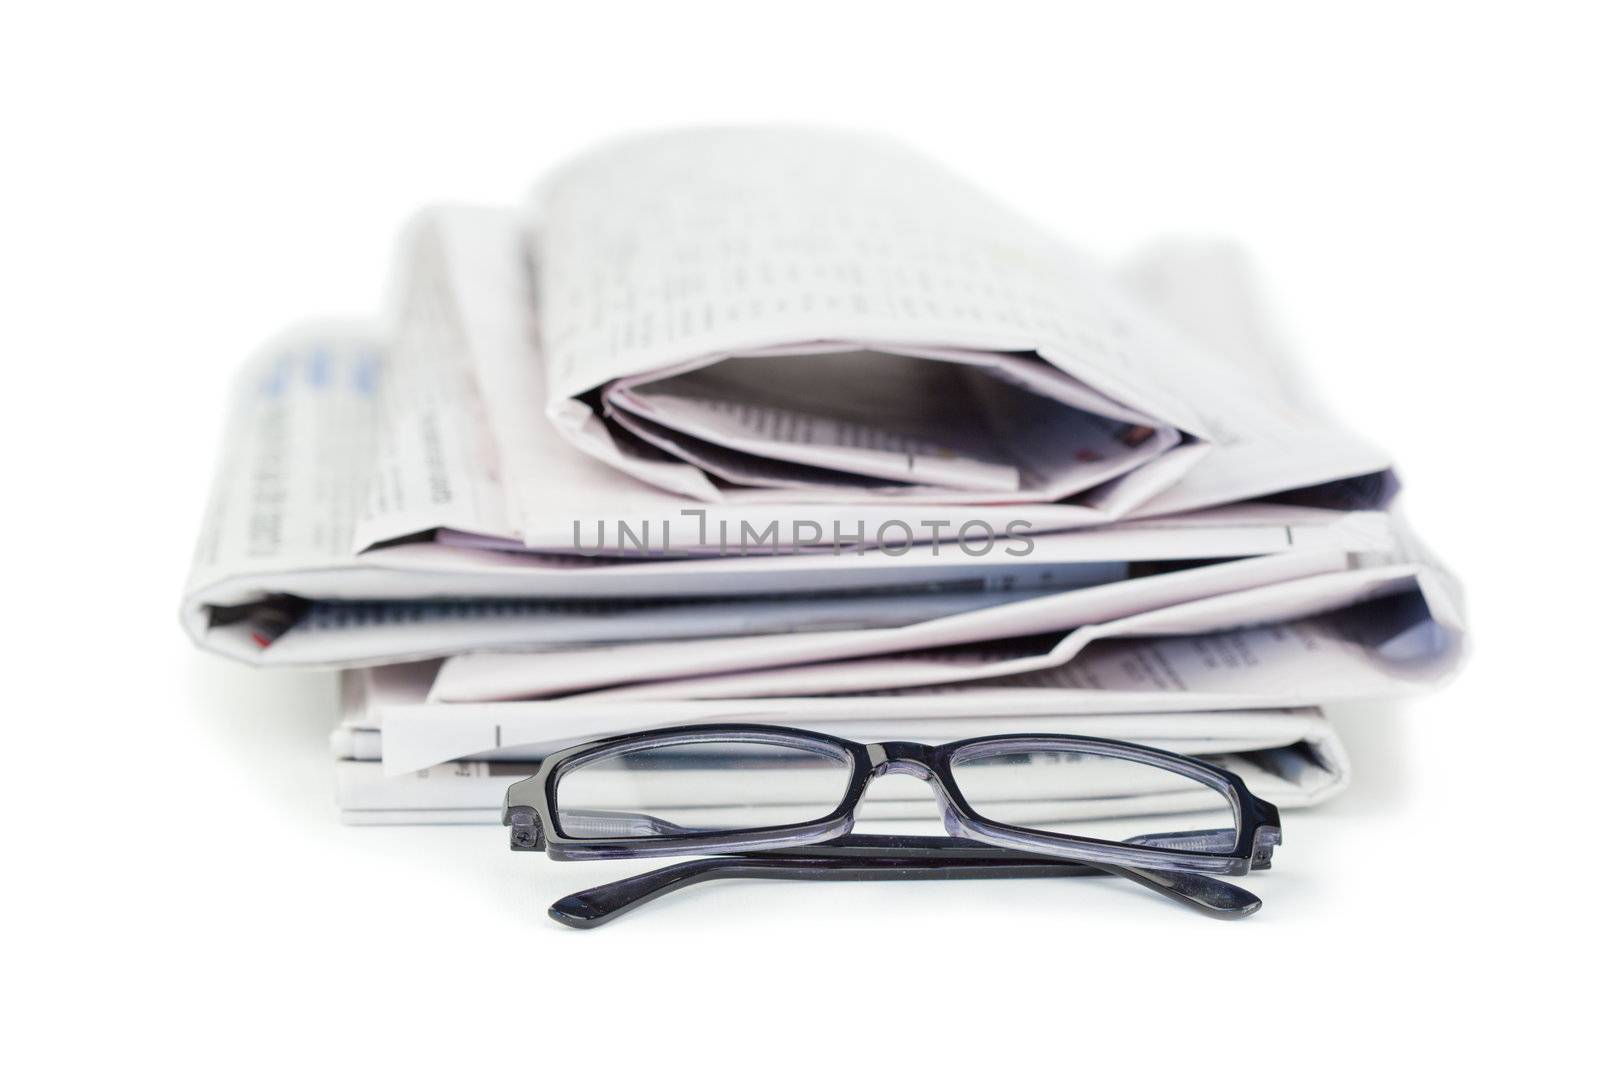 Newspapers and black glasses on a white a background